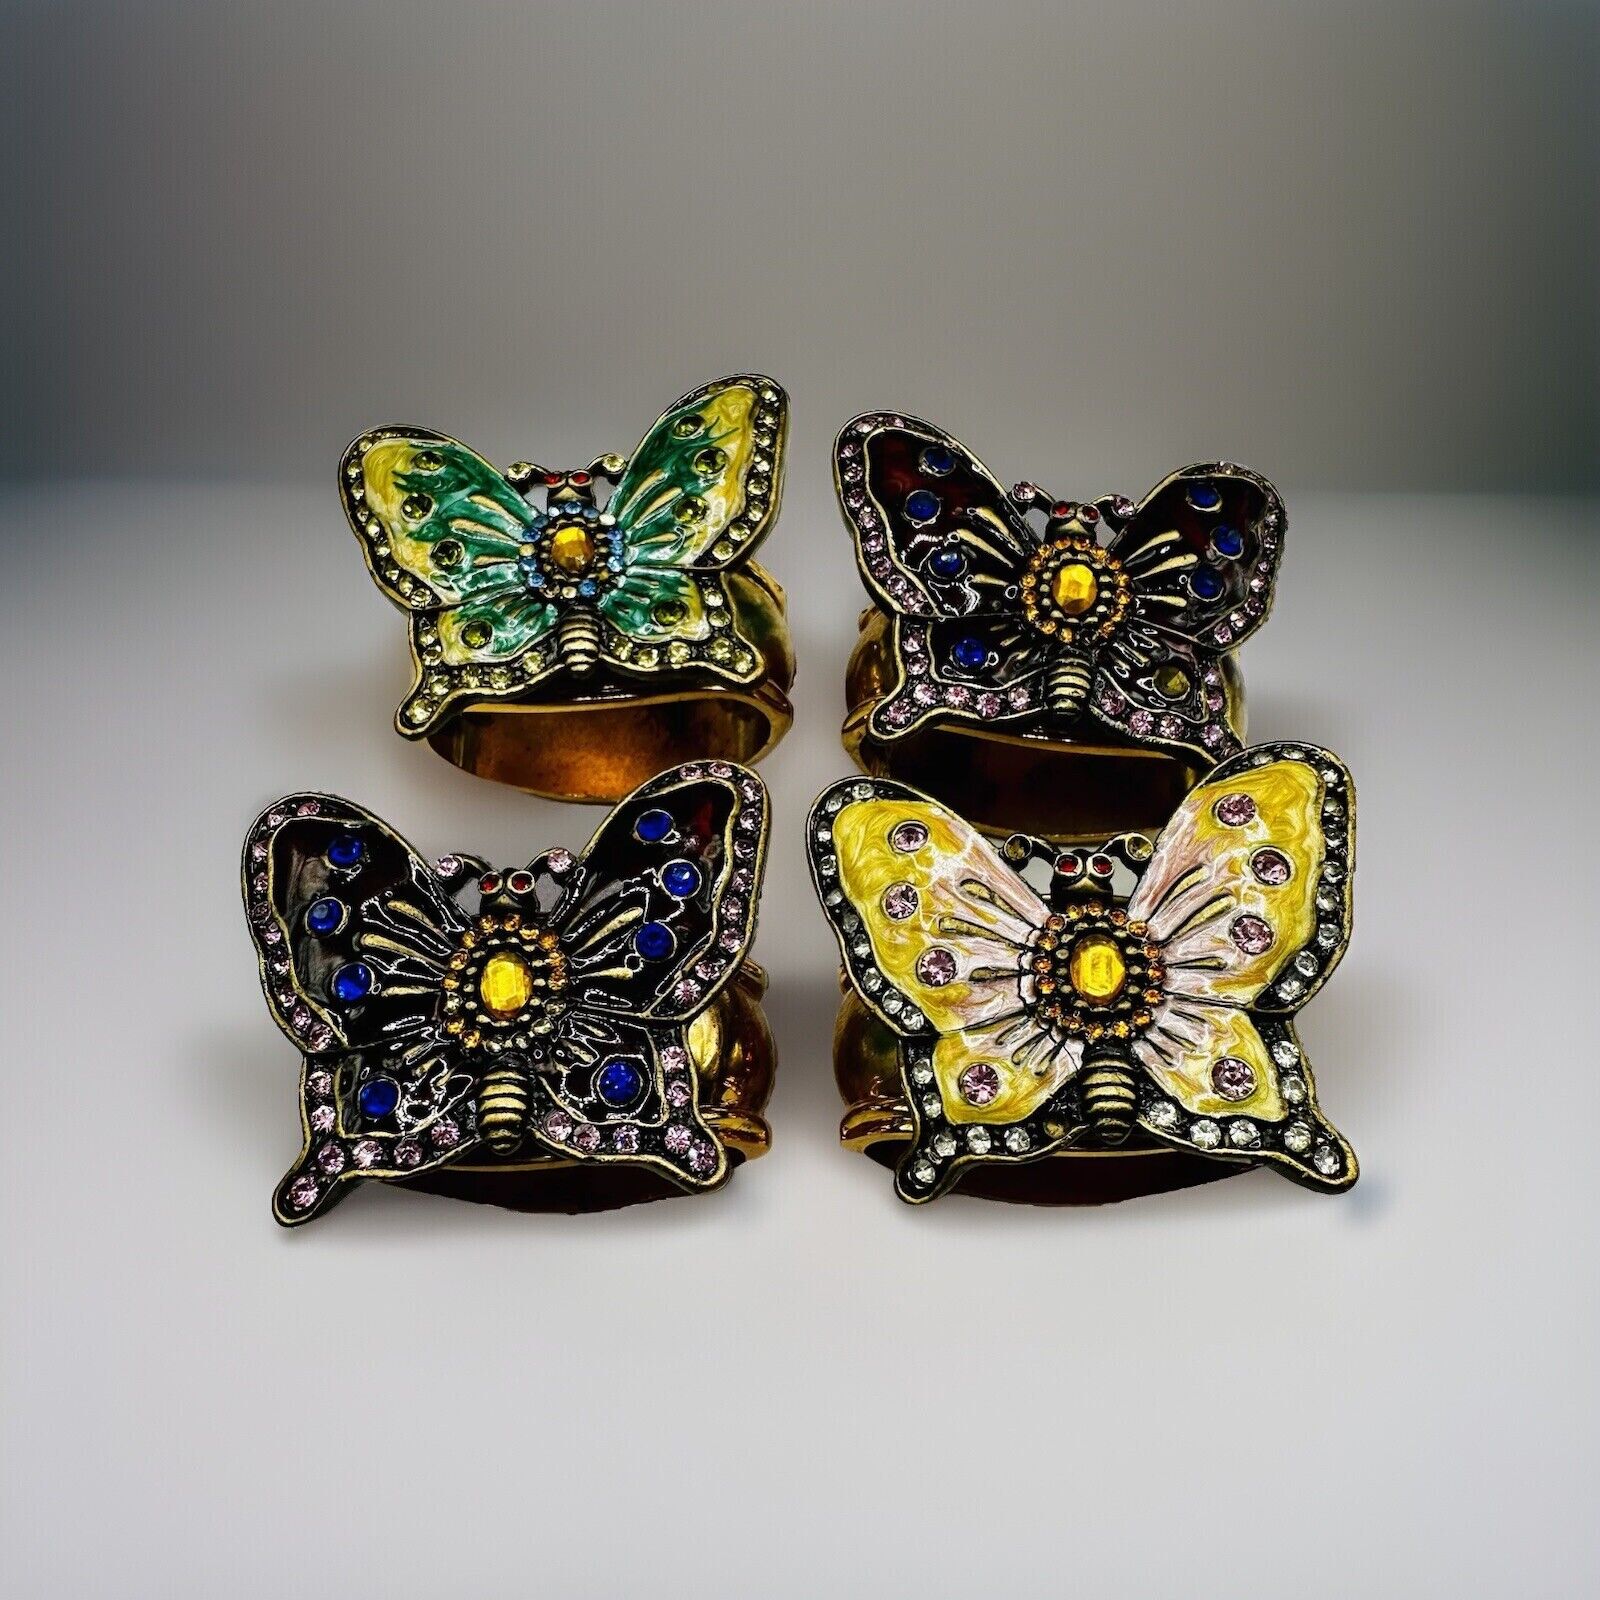 Hans Turnwald Butterfly Napkin Rings Jeweled Enamel Holders 4 Pieces AS IS READ